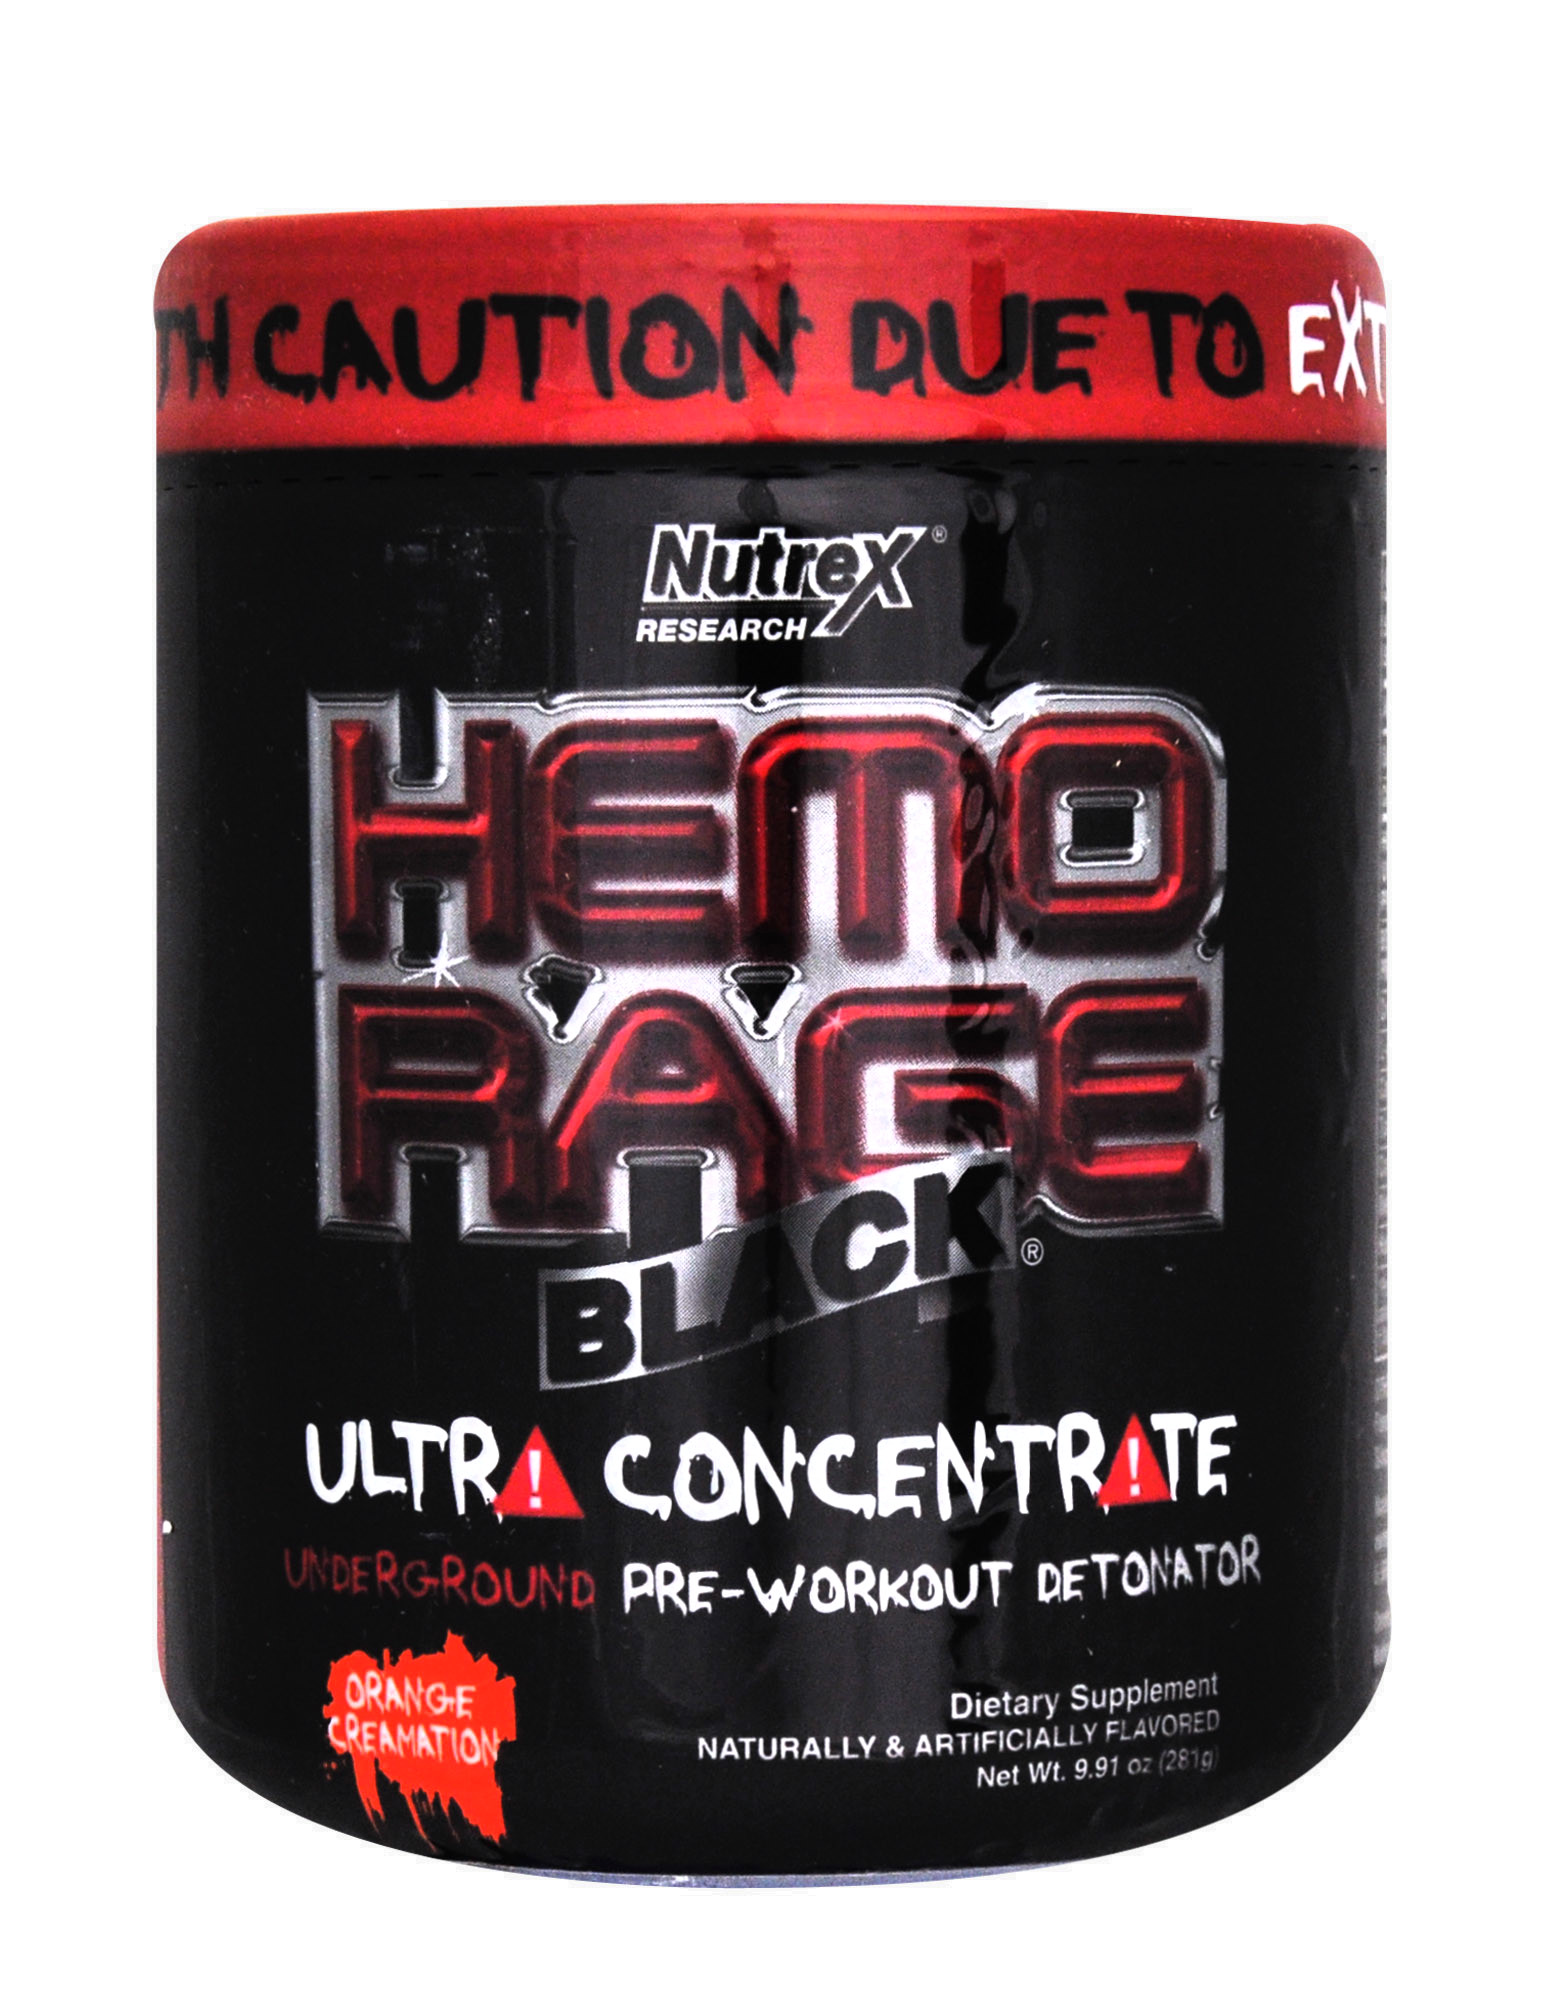 30 Minute Black rage pre workout with Comfort Workout Clothes